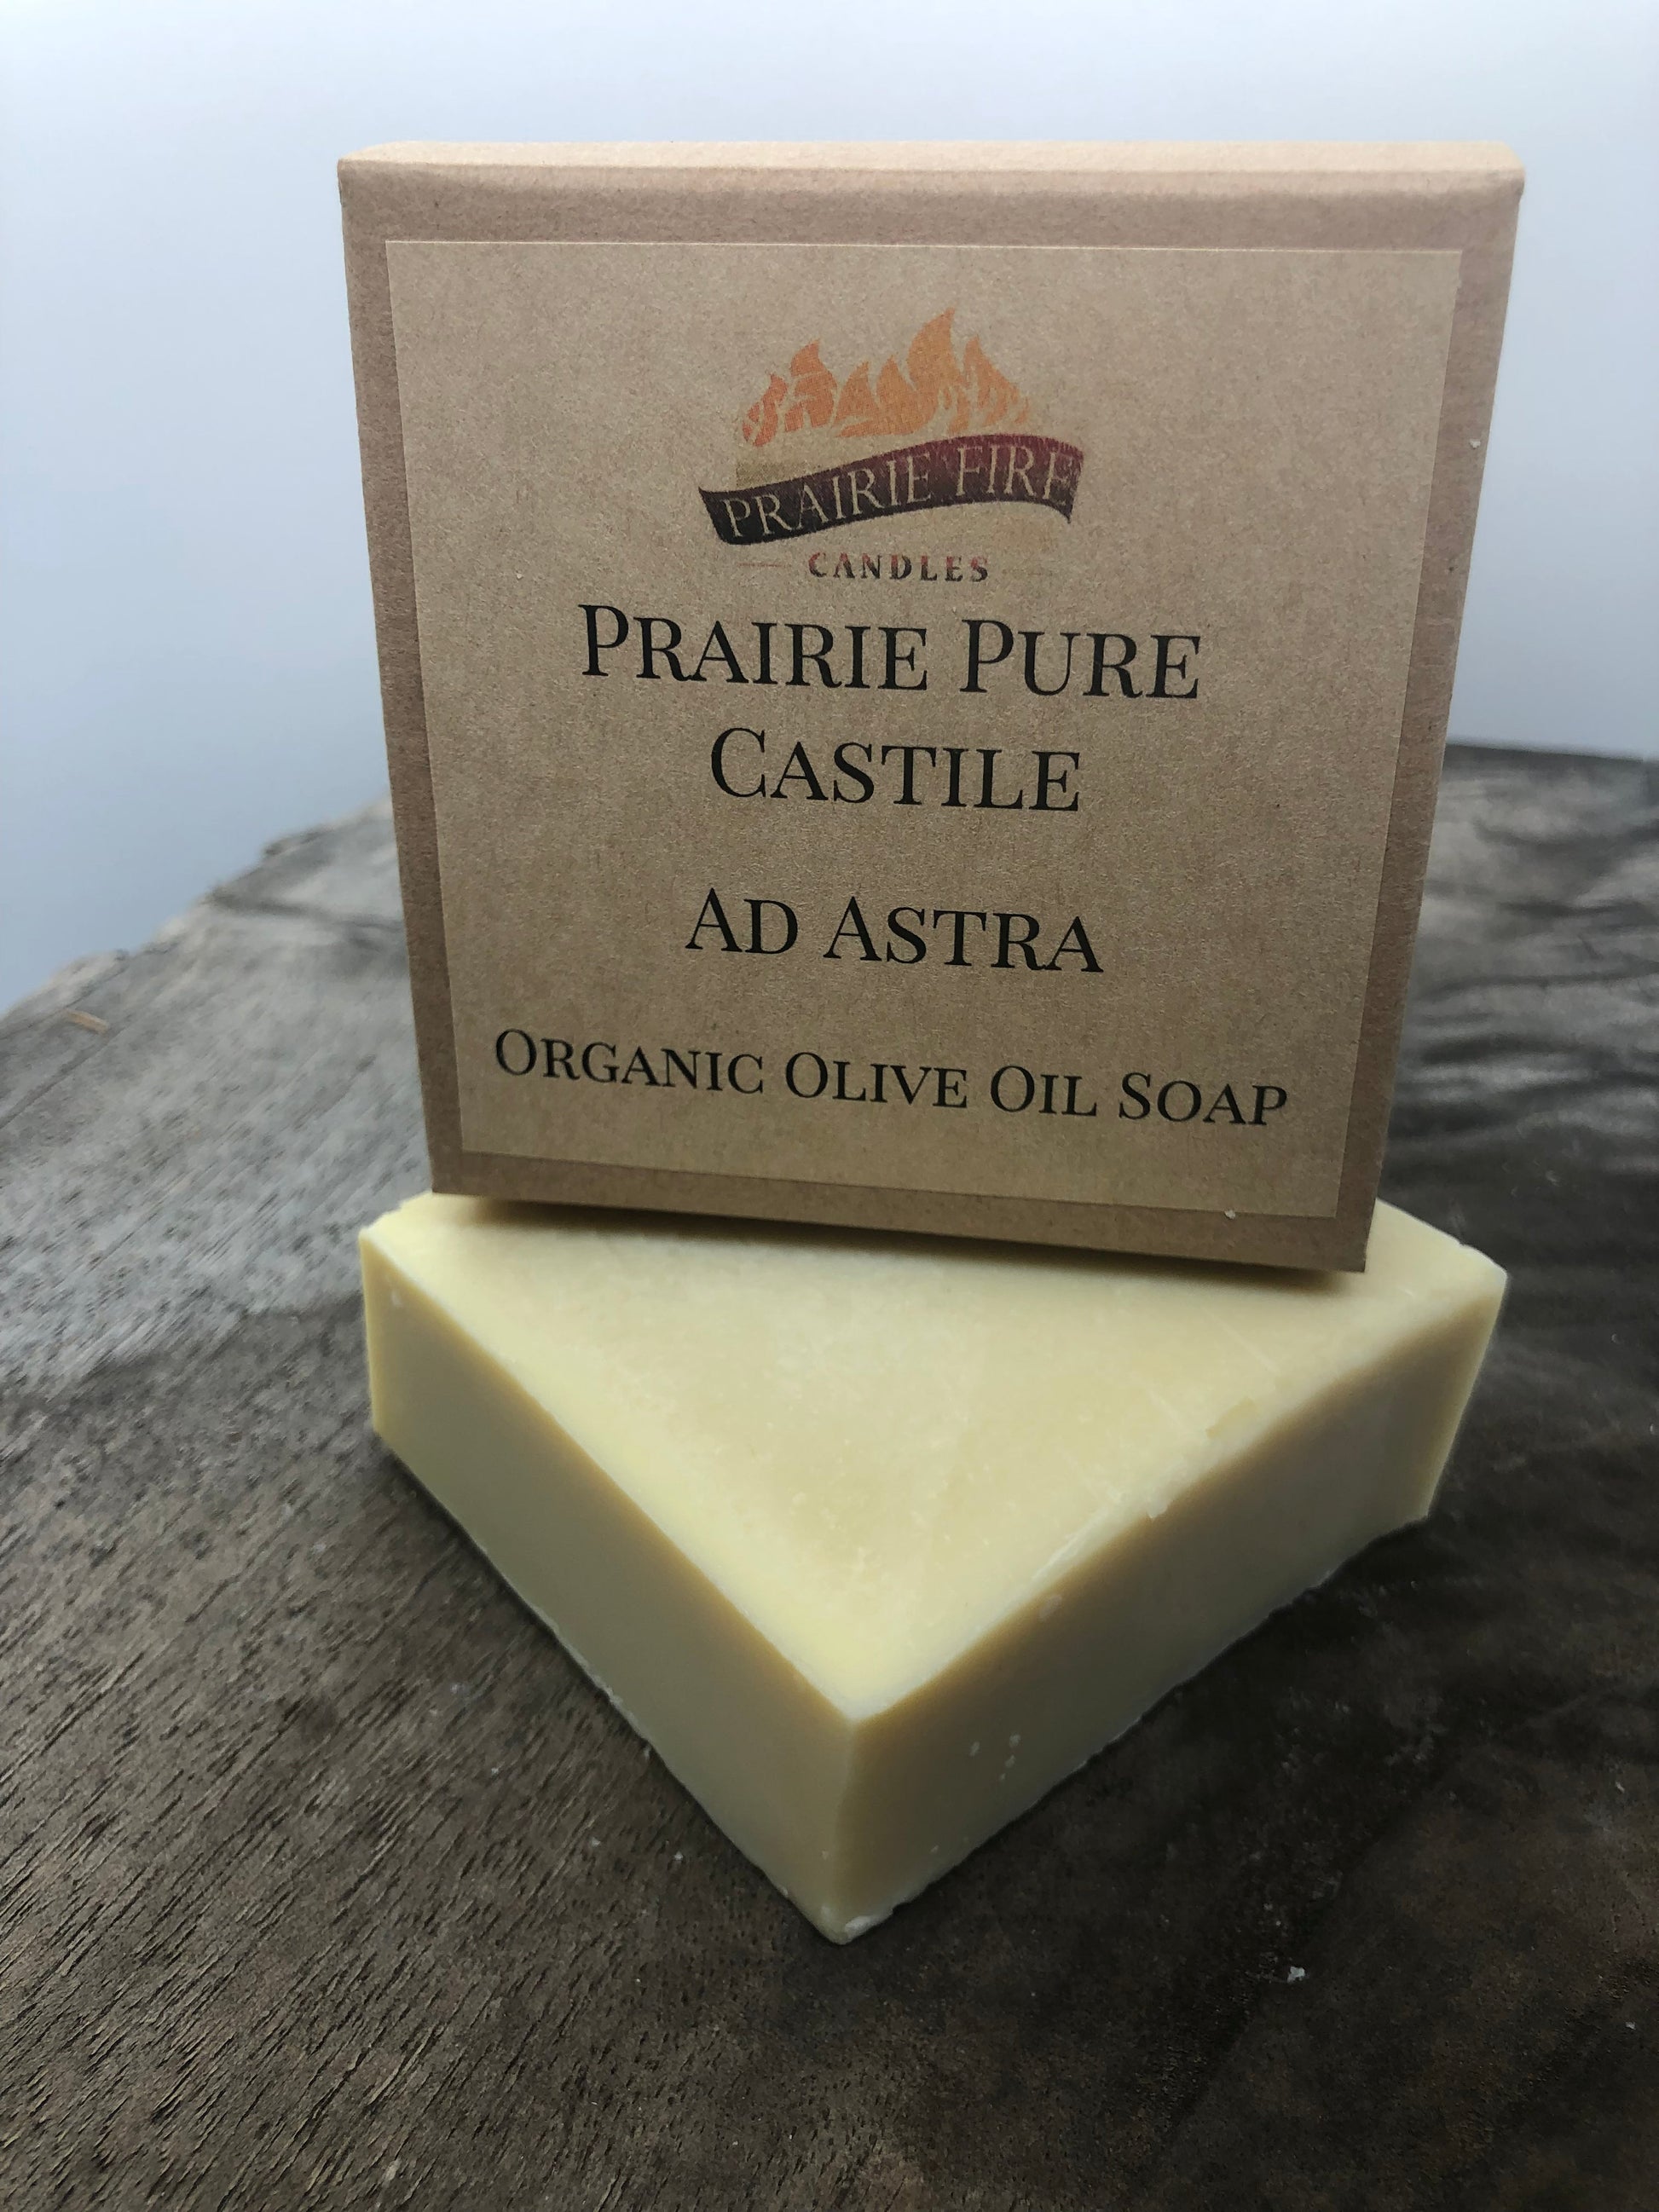 Ad Astra Real Castile Organic Olive Oil Soap for Sensitive Skin - Dye Free - 100% Certified Organic Extra Virgin Olive Oil-3